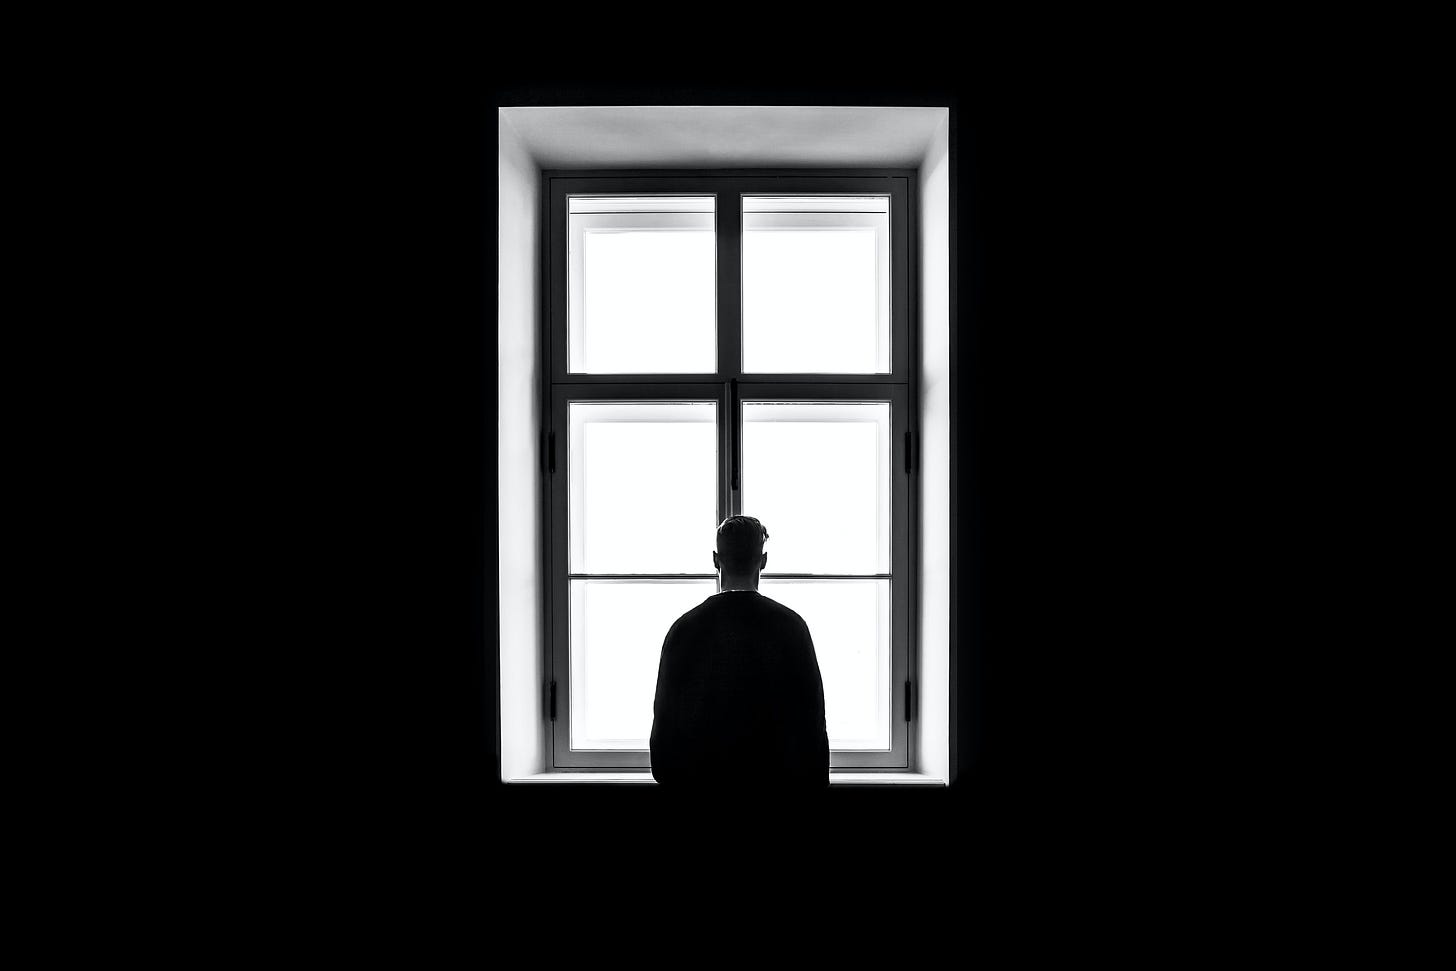 Photograph of a man peering out of a window. Photography by Sasha Freemind.